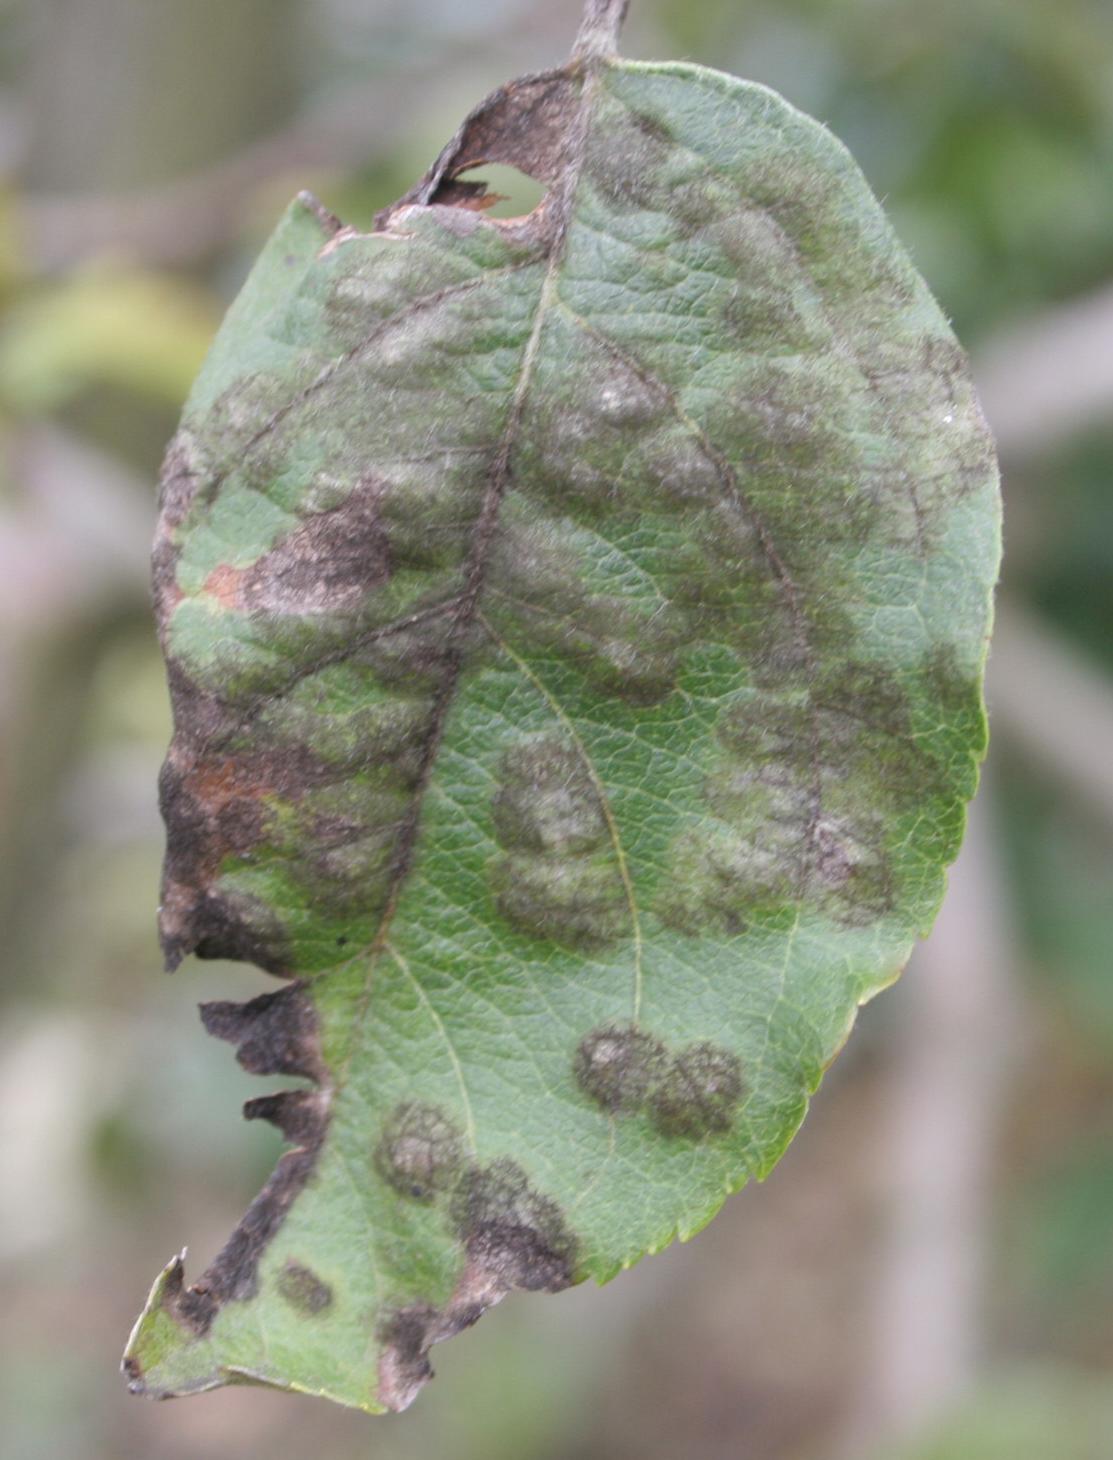 Advanced stage of apple scab on foliage (Strang, UKY)